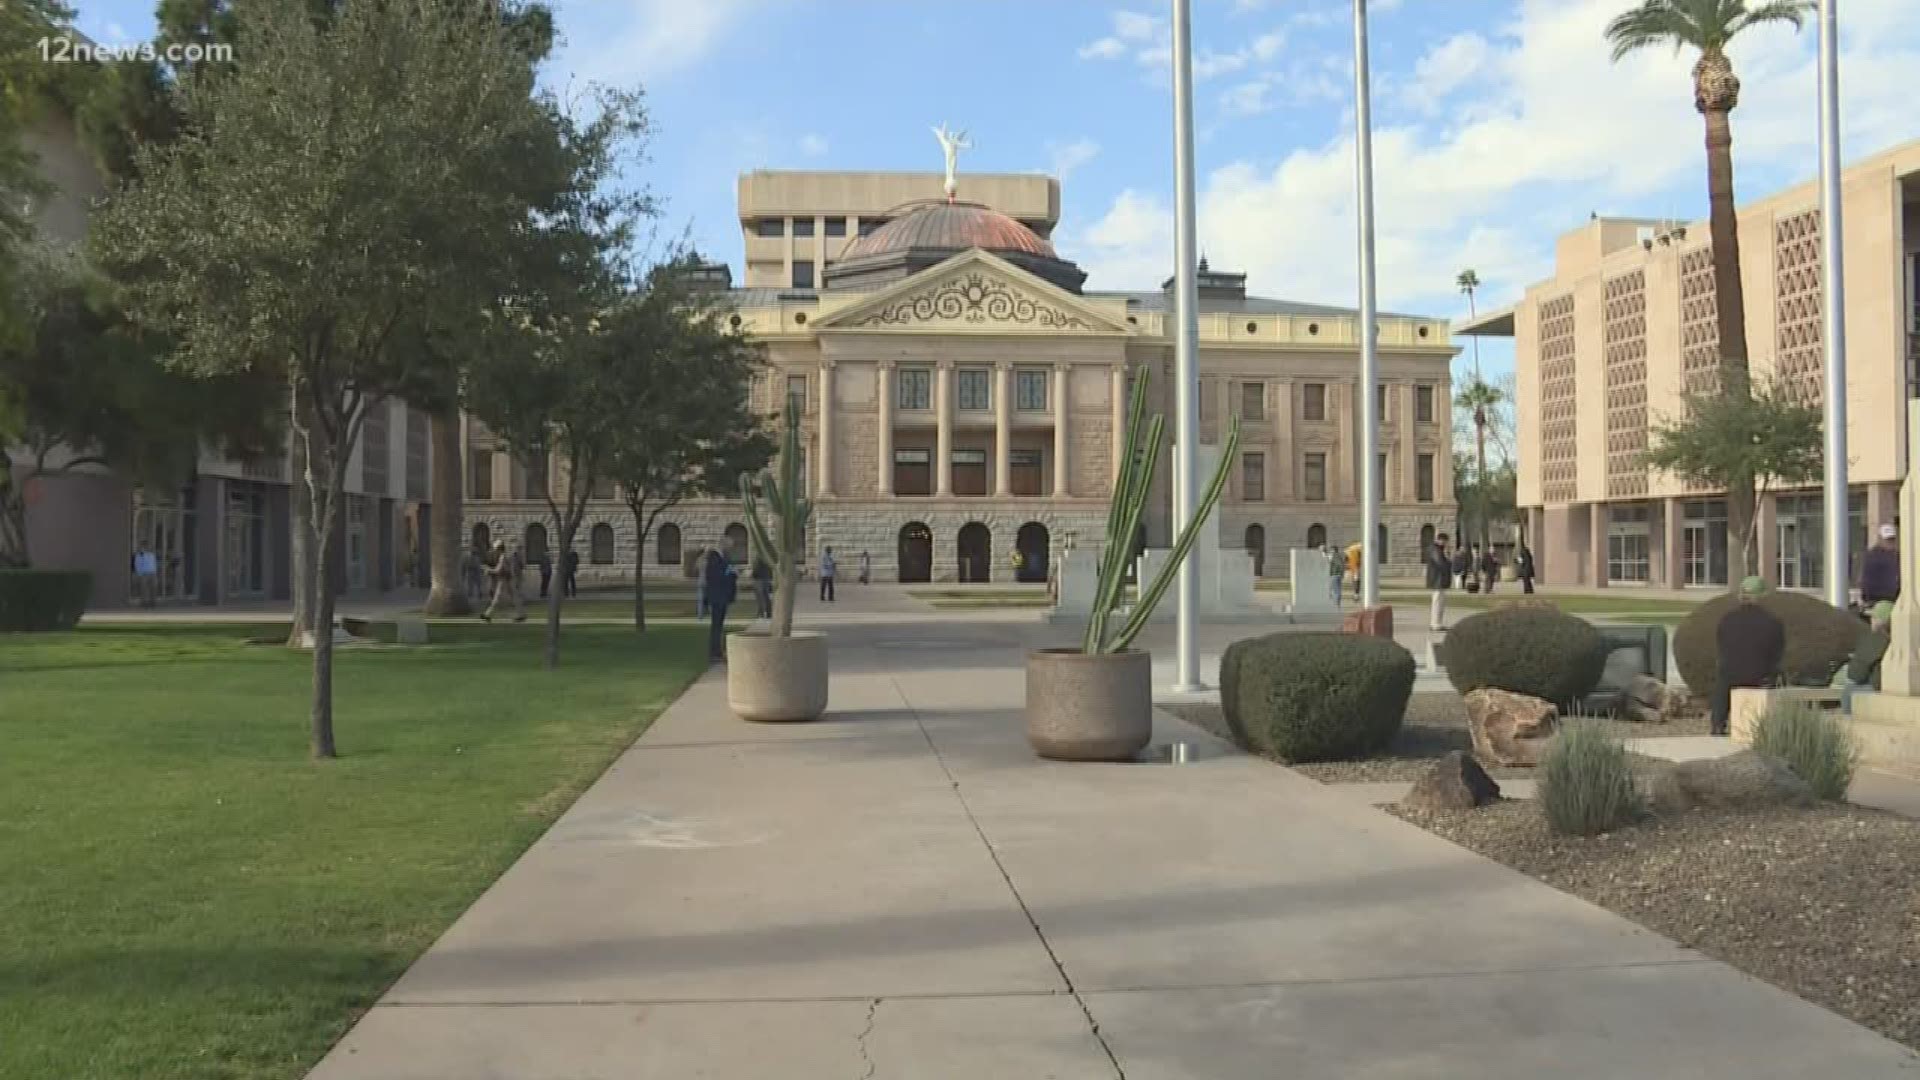 It's an Arizona Senate showdown with the state budget on one end and sexual assault survivor rights on the other. Senator Paul Boyer says he will not vote for the state budget until lawmakers support his bill extending the time child sexual assault survivors have to sue their perpetrators.